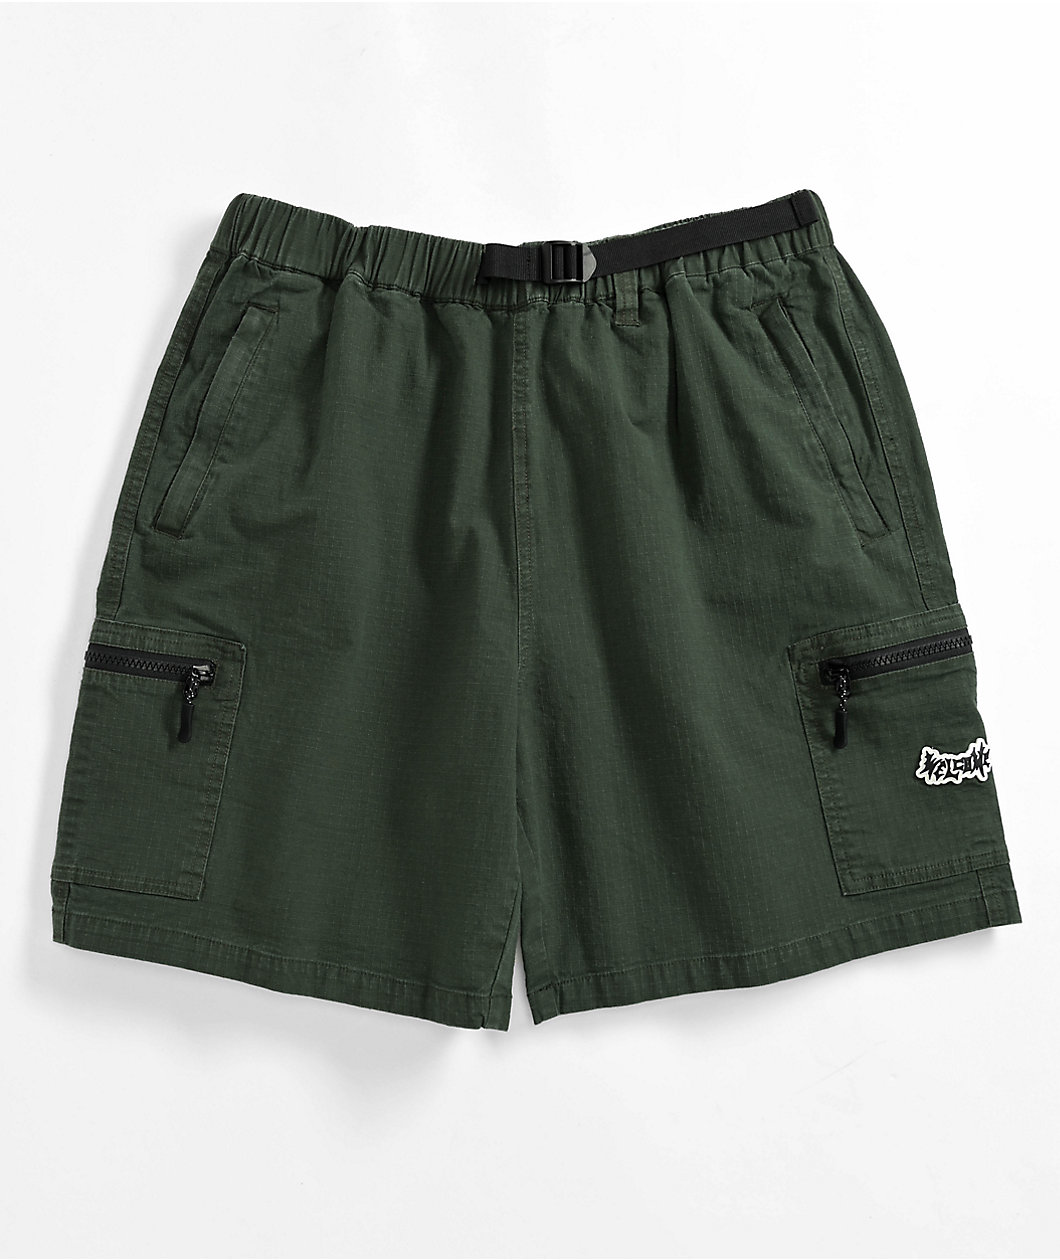 Welcome Summit Ripstop Green Cargo Shorts